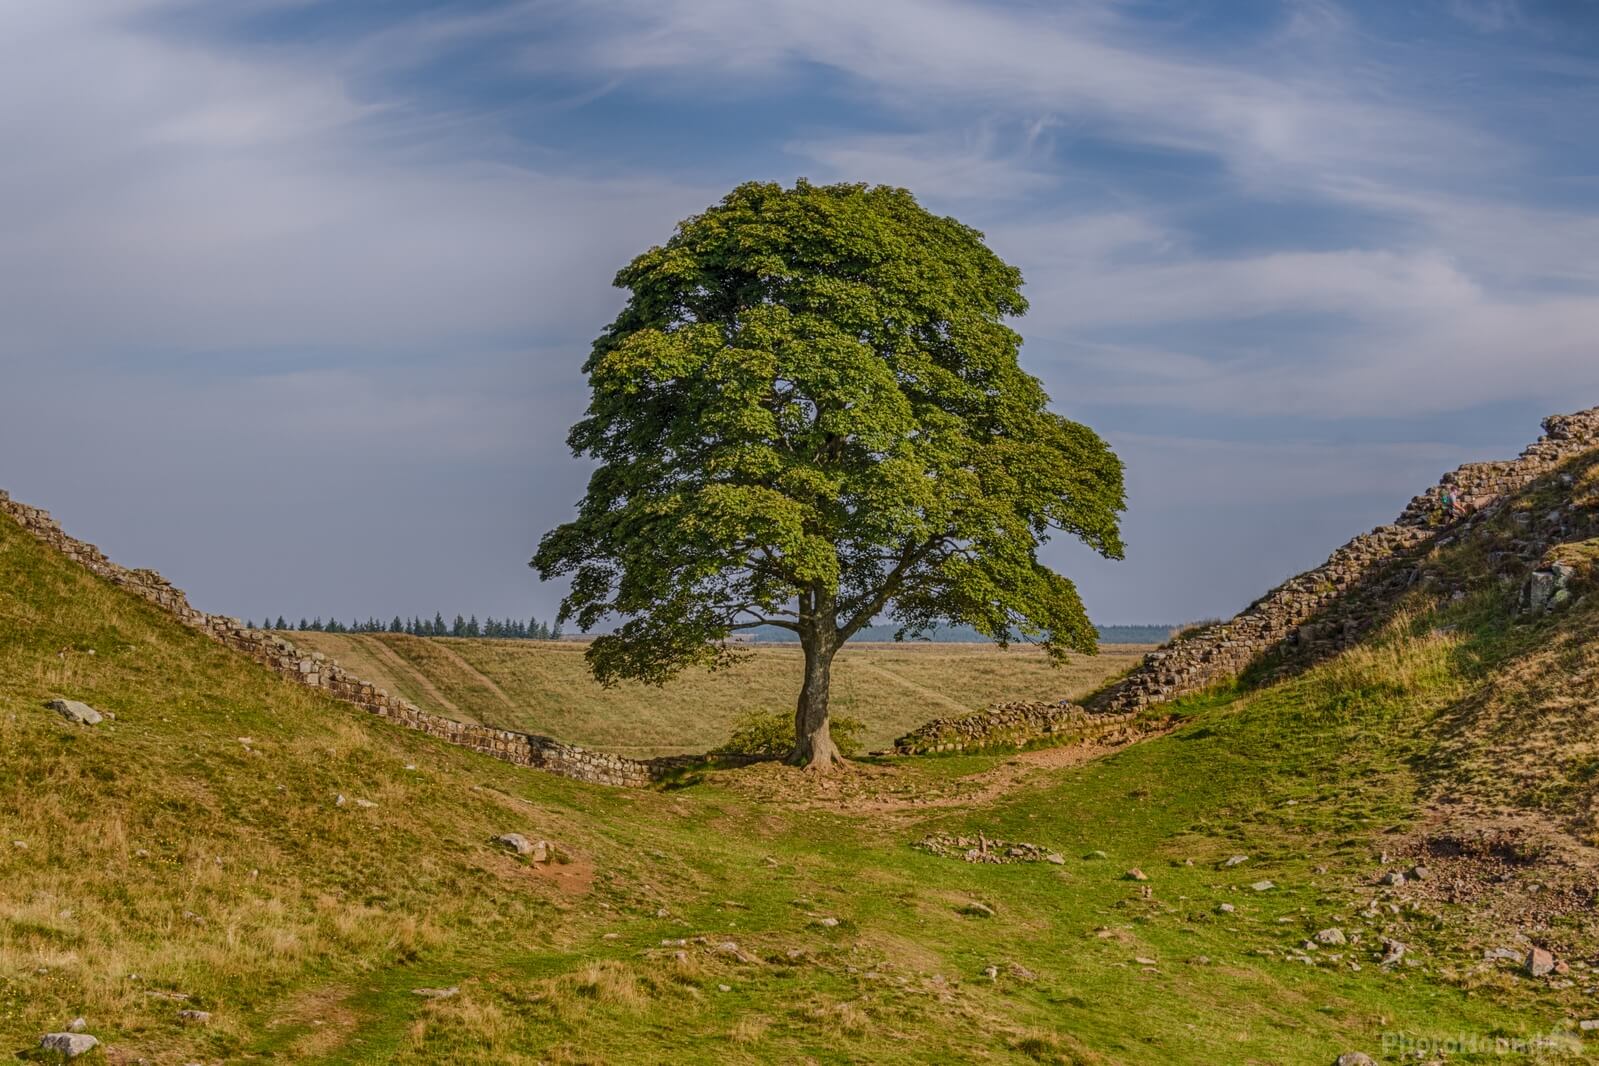 Image of Hadrian’s Wall - Sycamore Gap by Andy Killingbeck